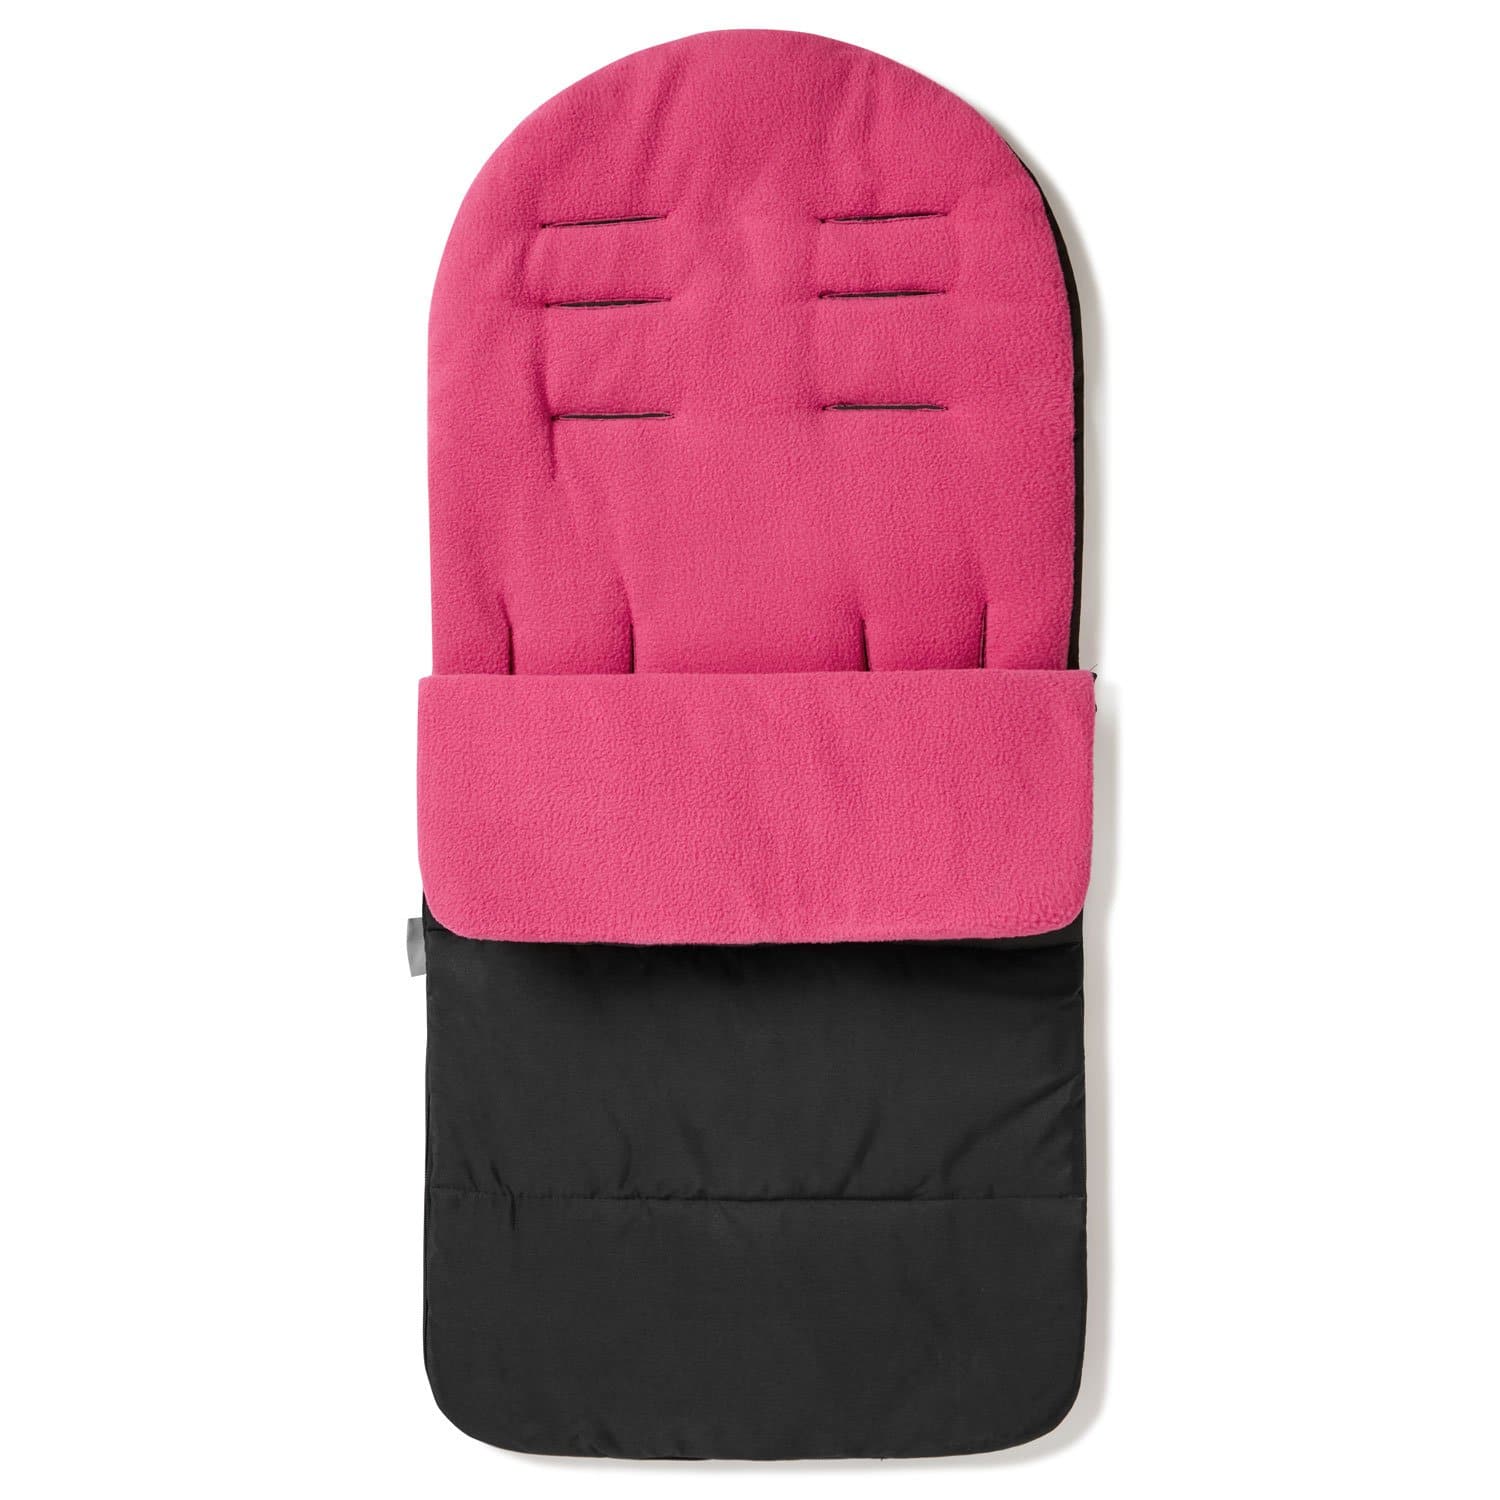 Premium Footmuff / Cosy Toes Compatible with Maxi Cosi - Pink Rose / Fits All Models | For Your Little One